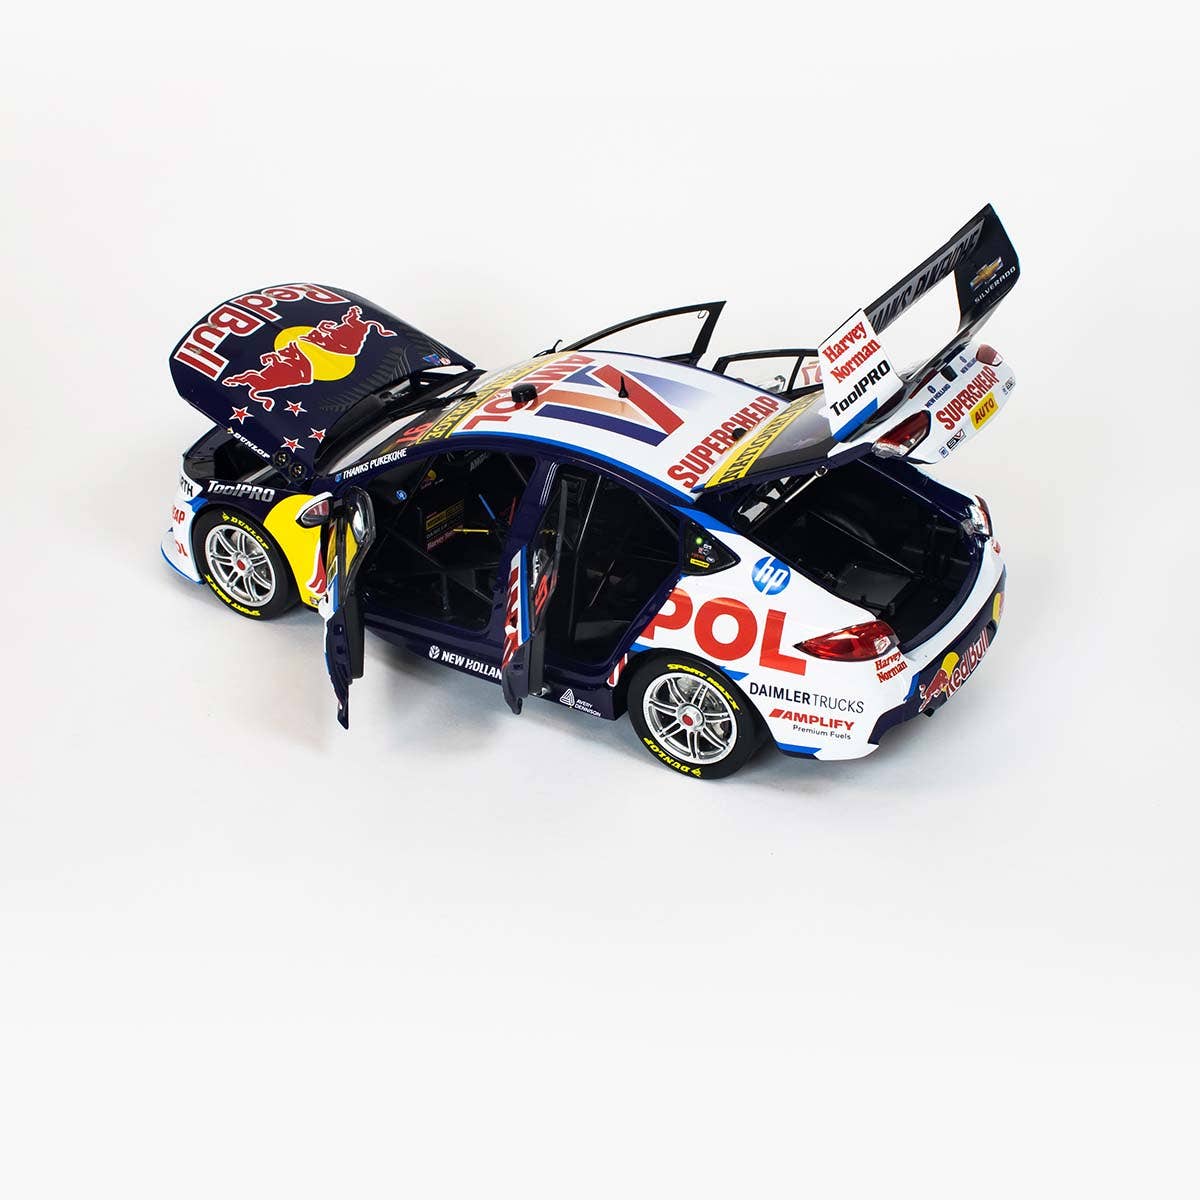 HOLDEN ZB COMMODORE - RED BULL AMPOL RACING - VAN GISBERGEN #97 - 2022 ITM Auckland Supersprint (Last Race at Pukekohe) - 1:18 Scale Diecast Model Car